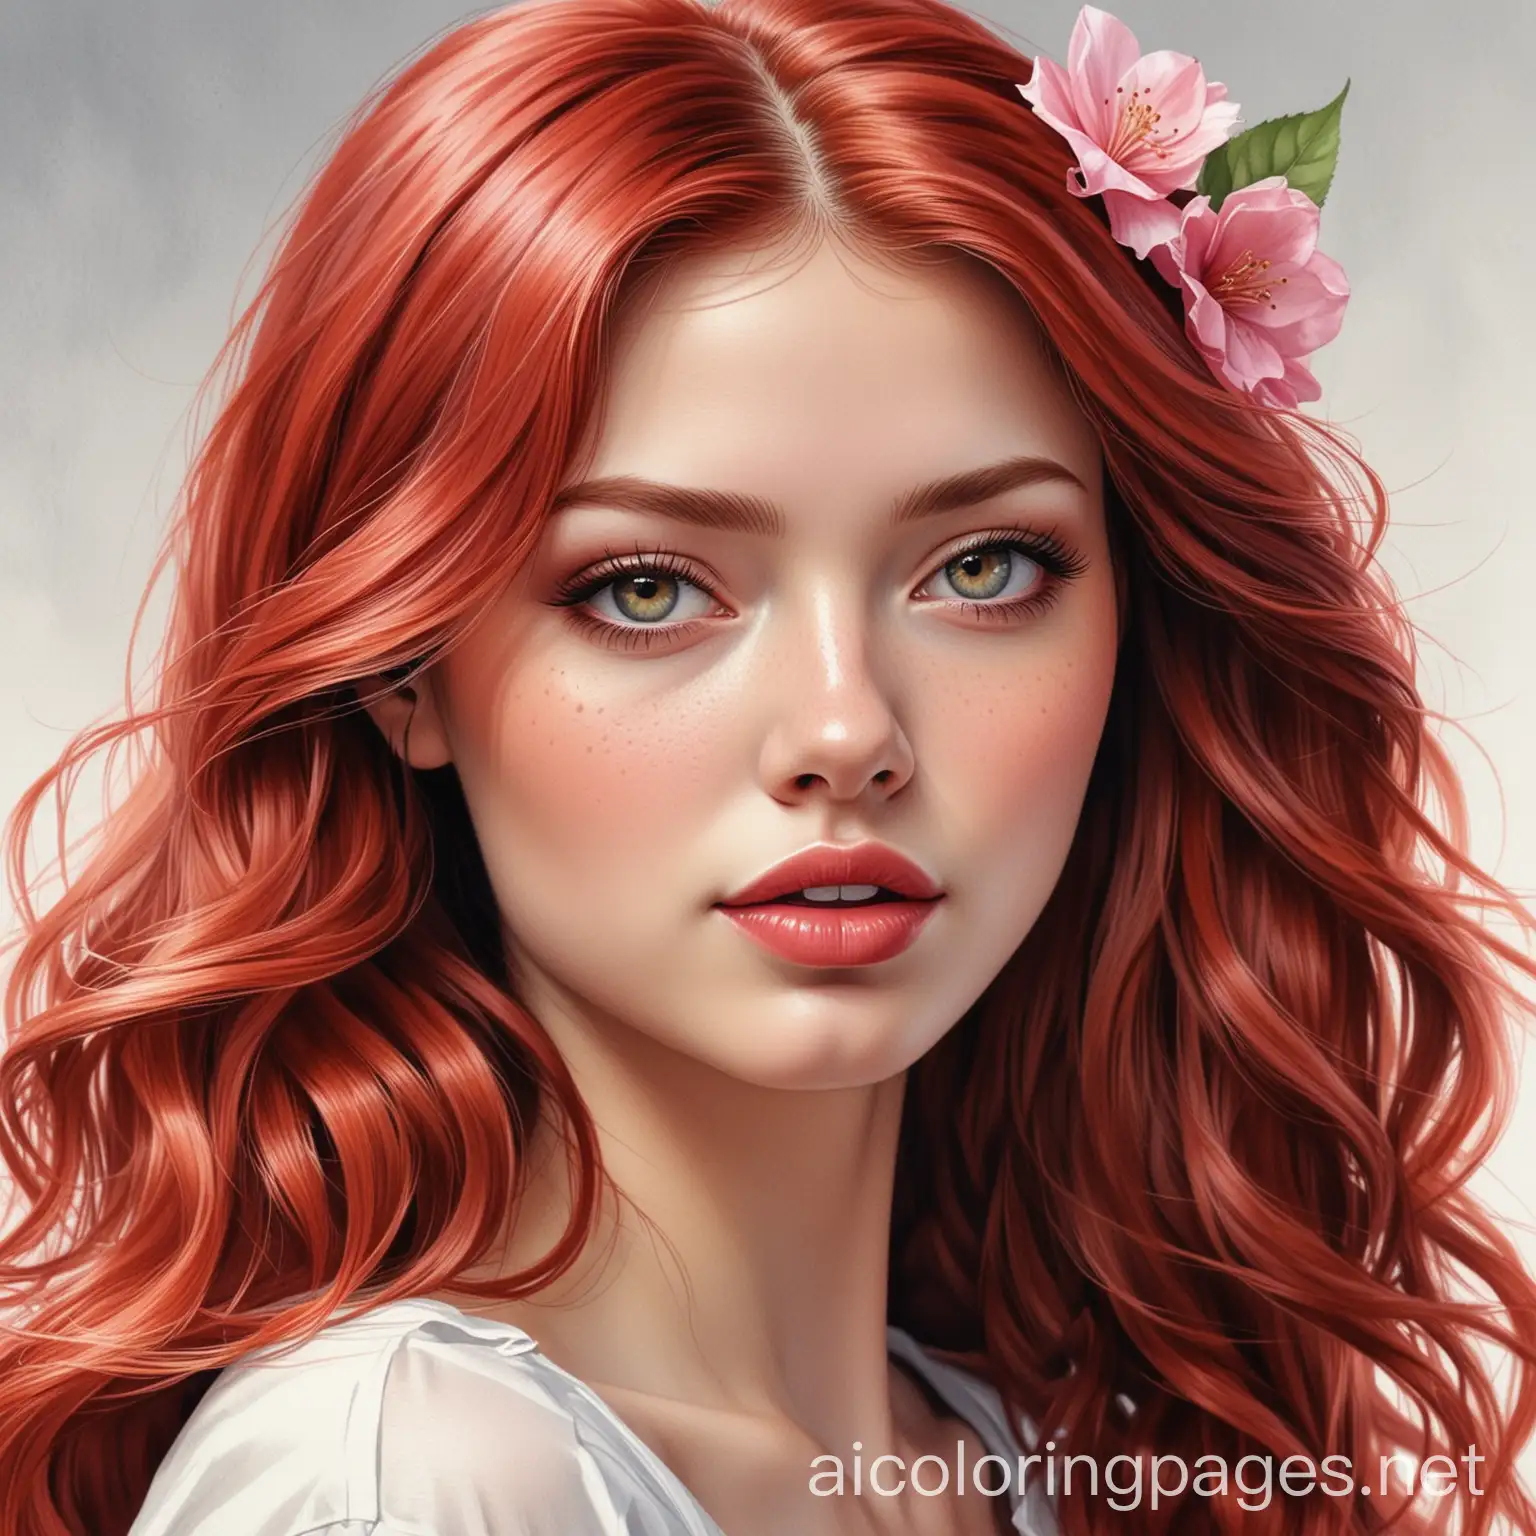 Cherry-RedHaired-Love-Fairy-in-Pink-and-Red-Attire